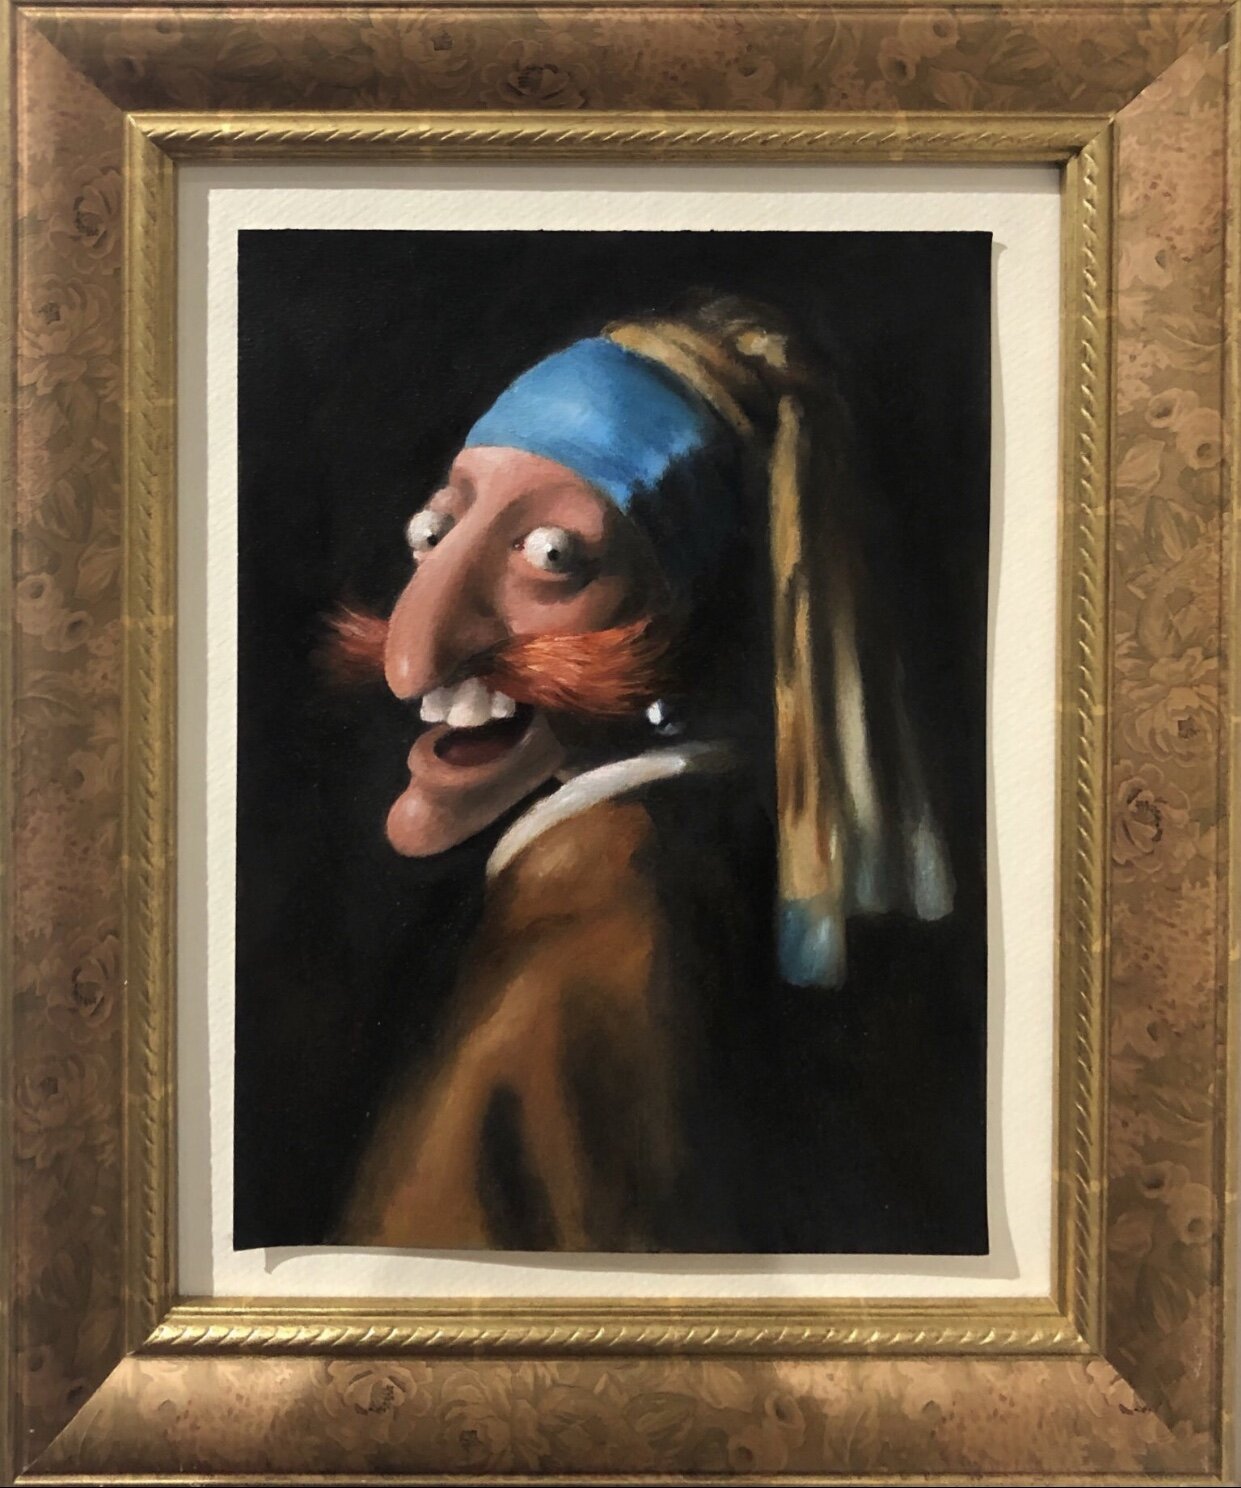   Nigel with a Pearl Earring , oil on paper, 9” x 12” 